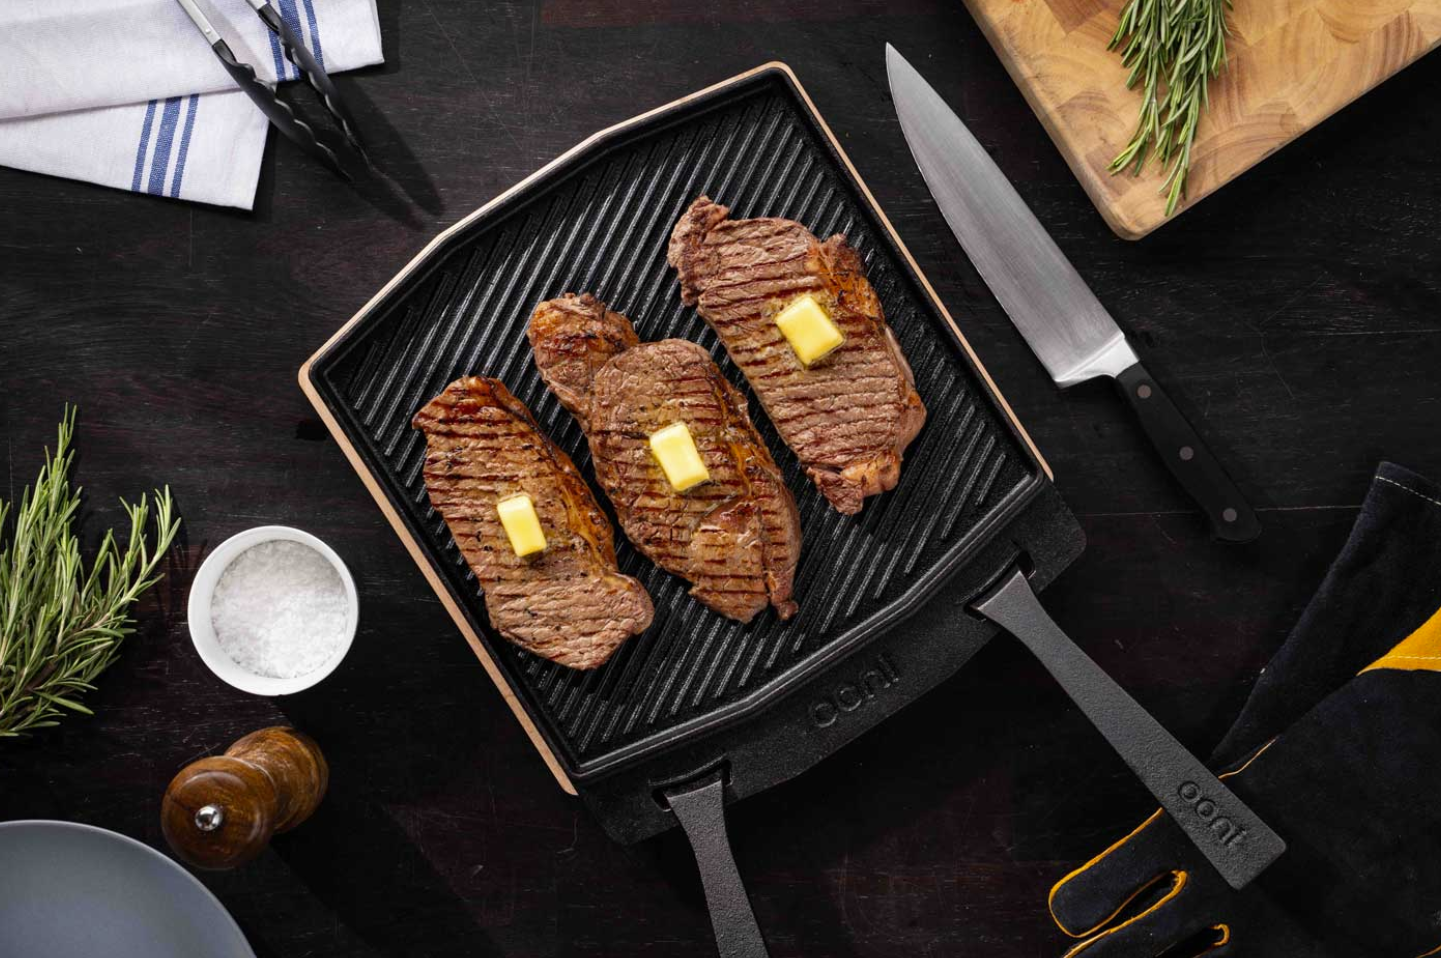 DOUBLE SIDED GRILL PAN 